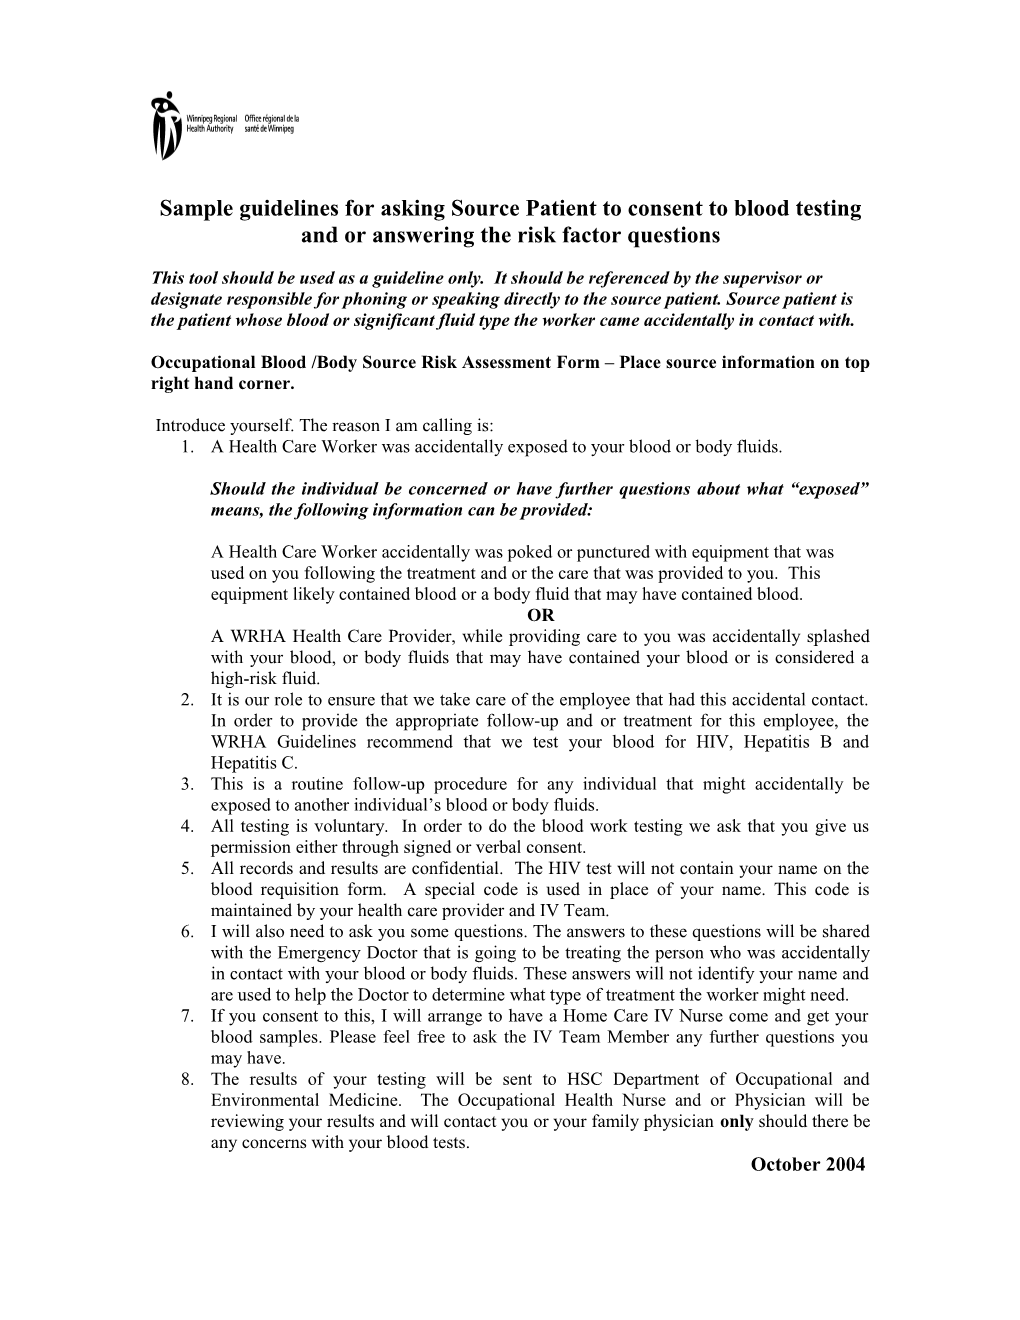 Sample Guidelines for Asking Source Patient to Consent to Blood Testing and Or Answering